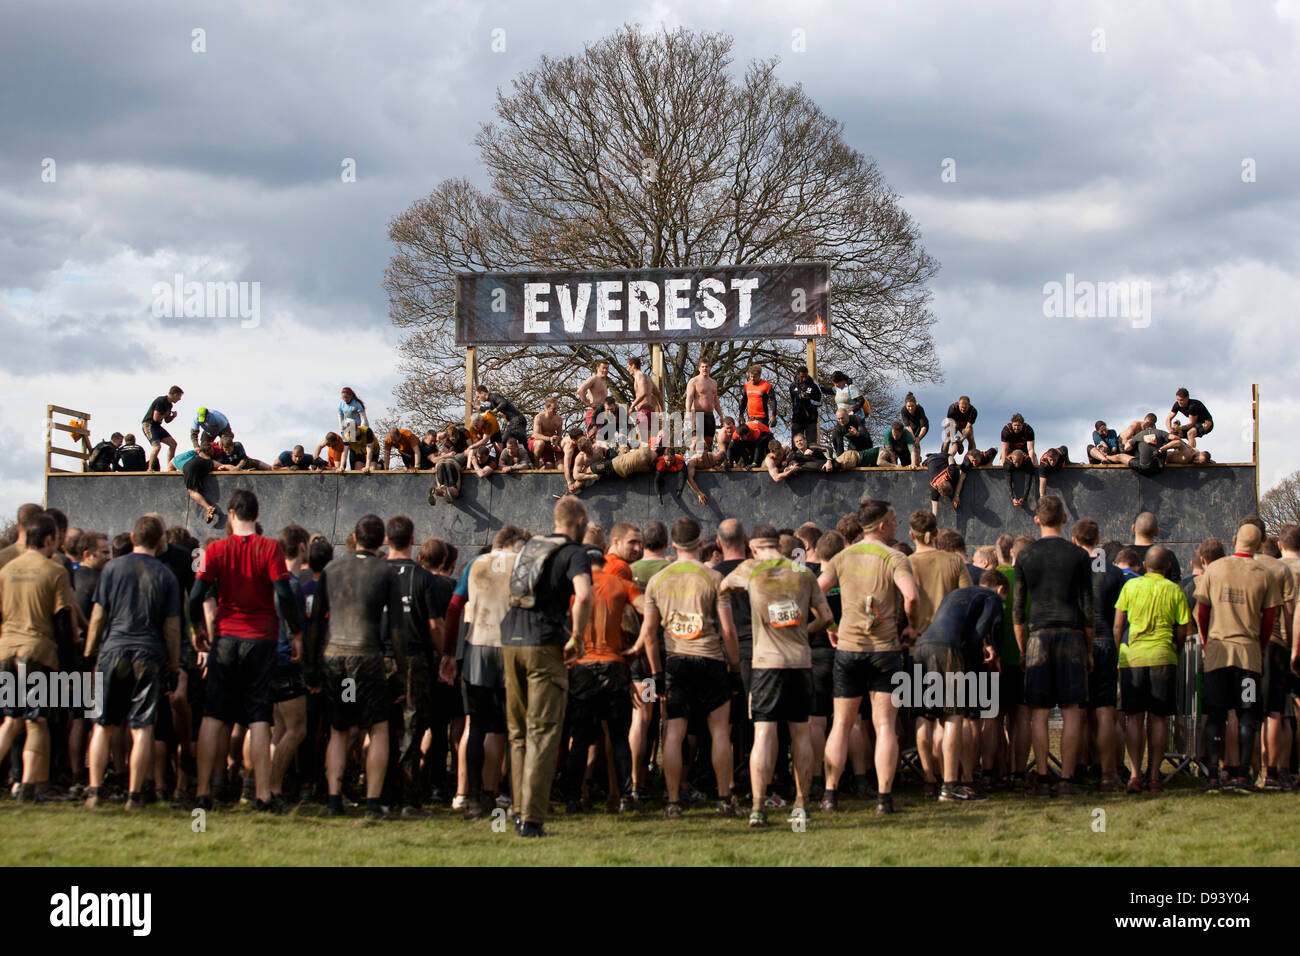 Participants at Tough Mudder 2013 (an endurance event) in Kettering/North East London Stock Photo